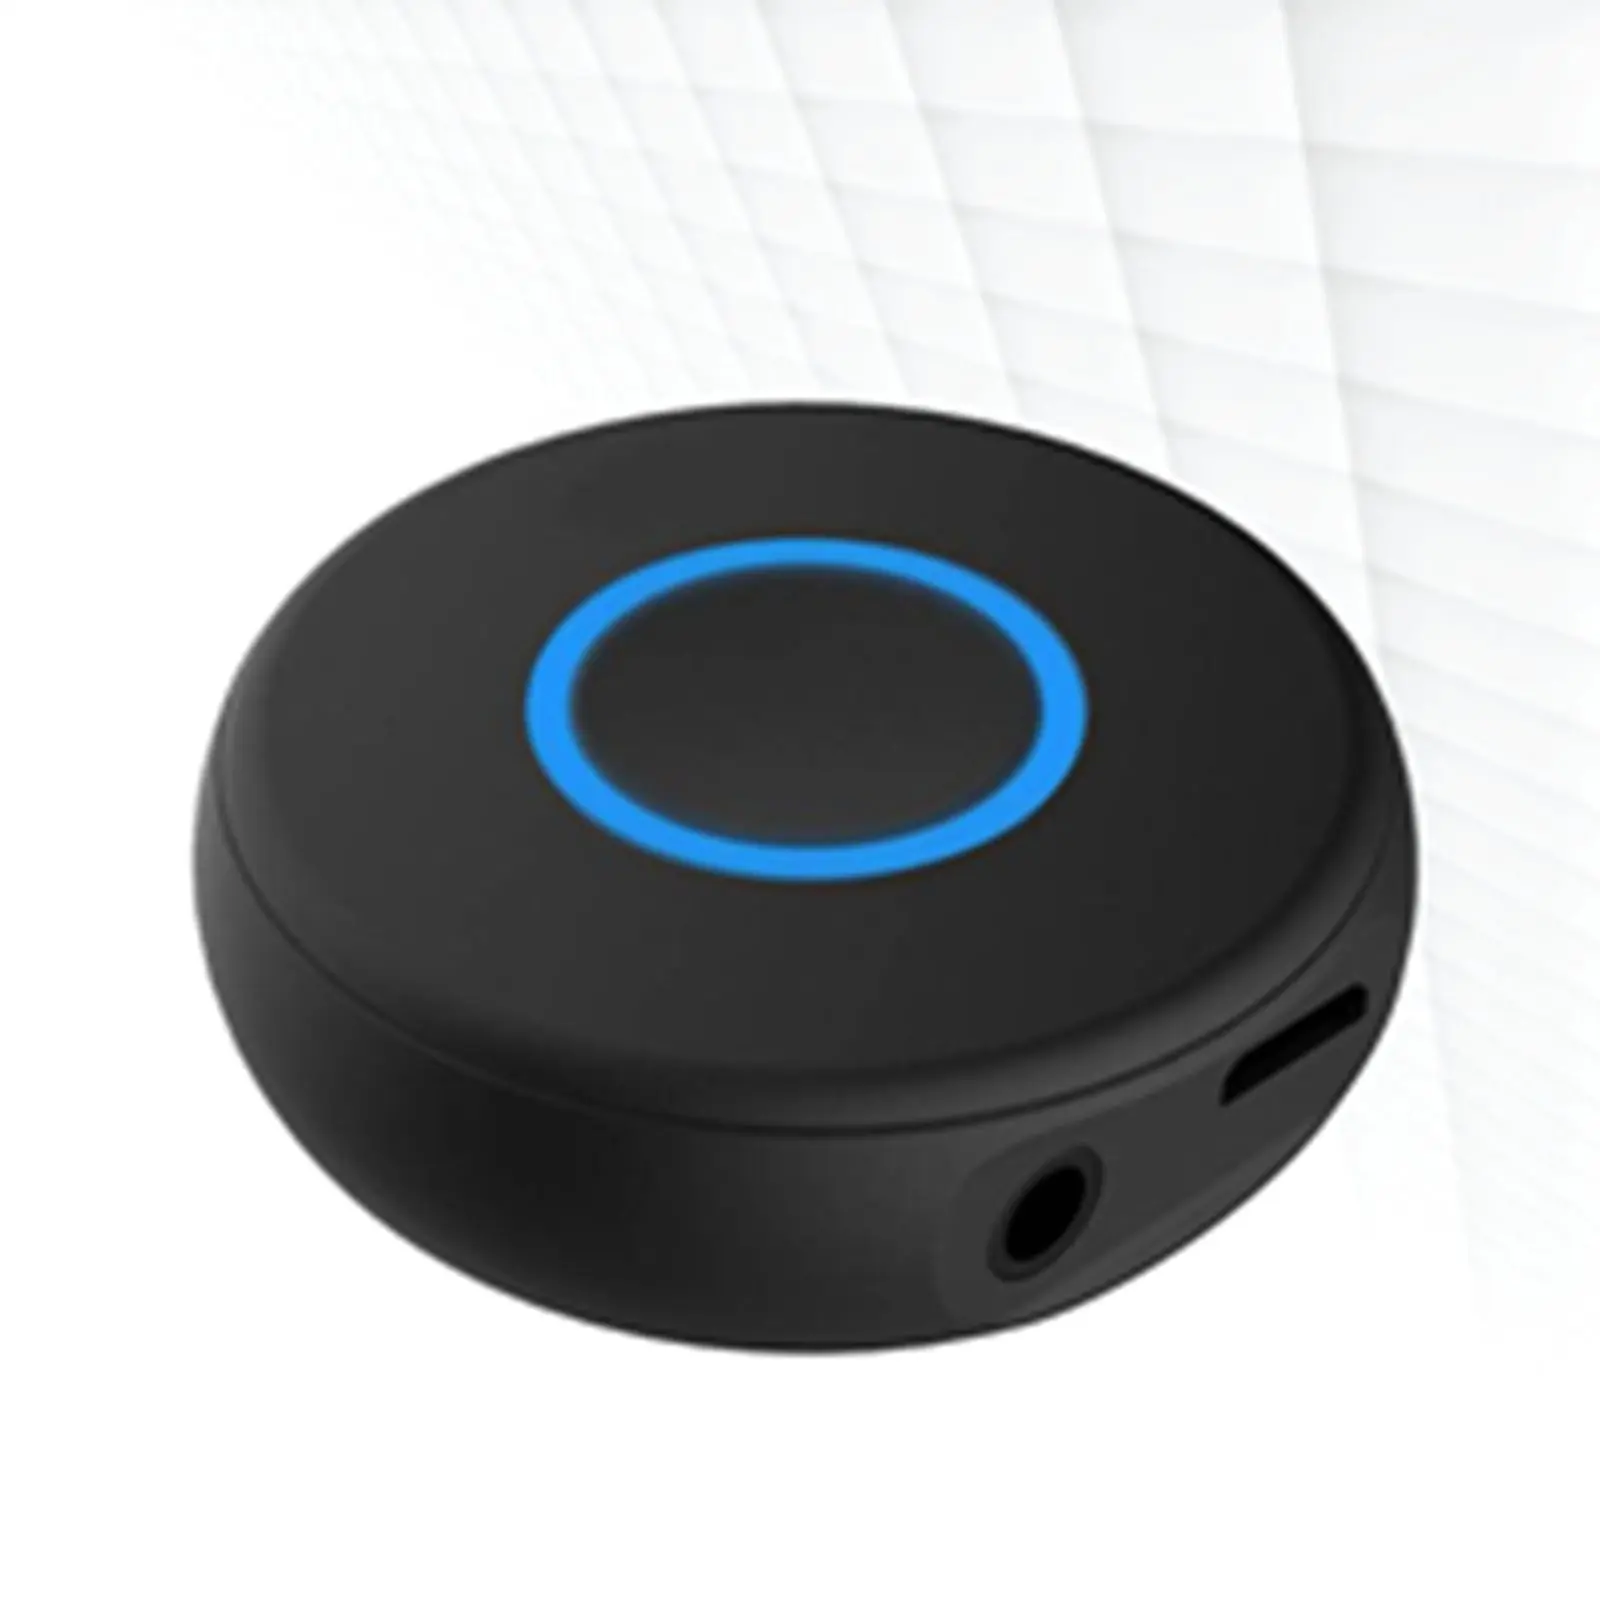 Bluetooth Adapter Transmitter Wireless Audio Adapter with AUX 3.5mm Low Latency for Home Car Music Sound System Portable